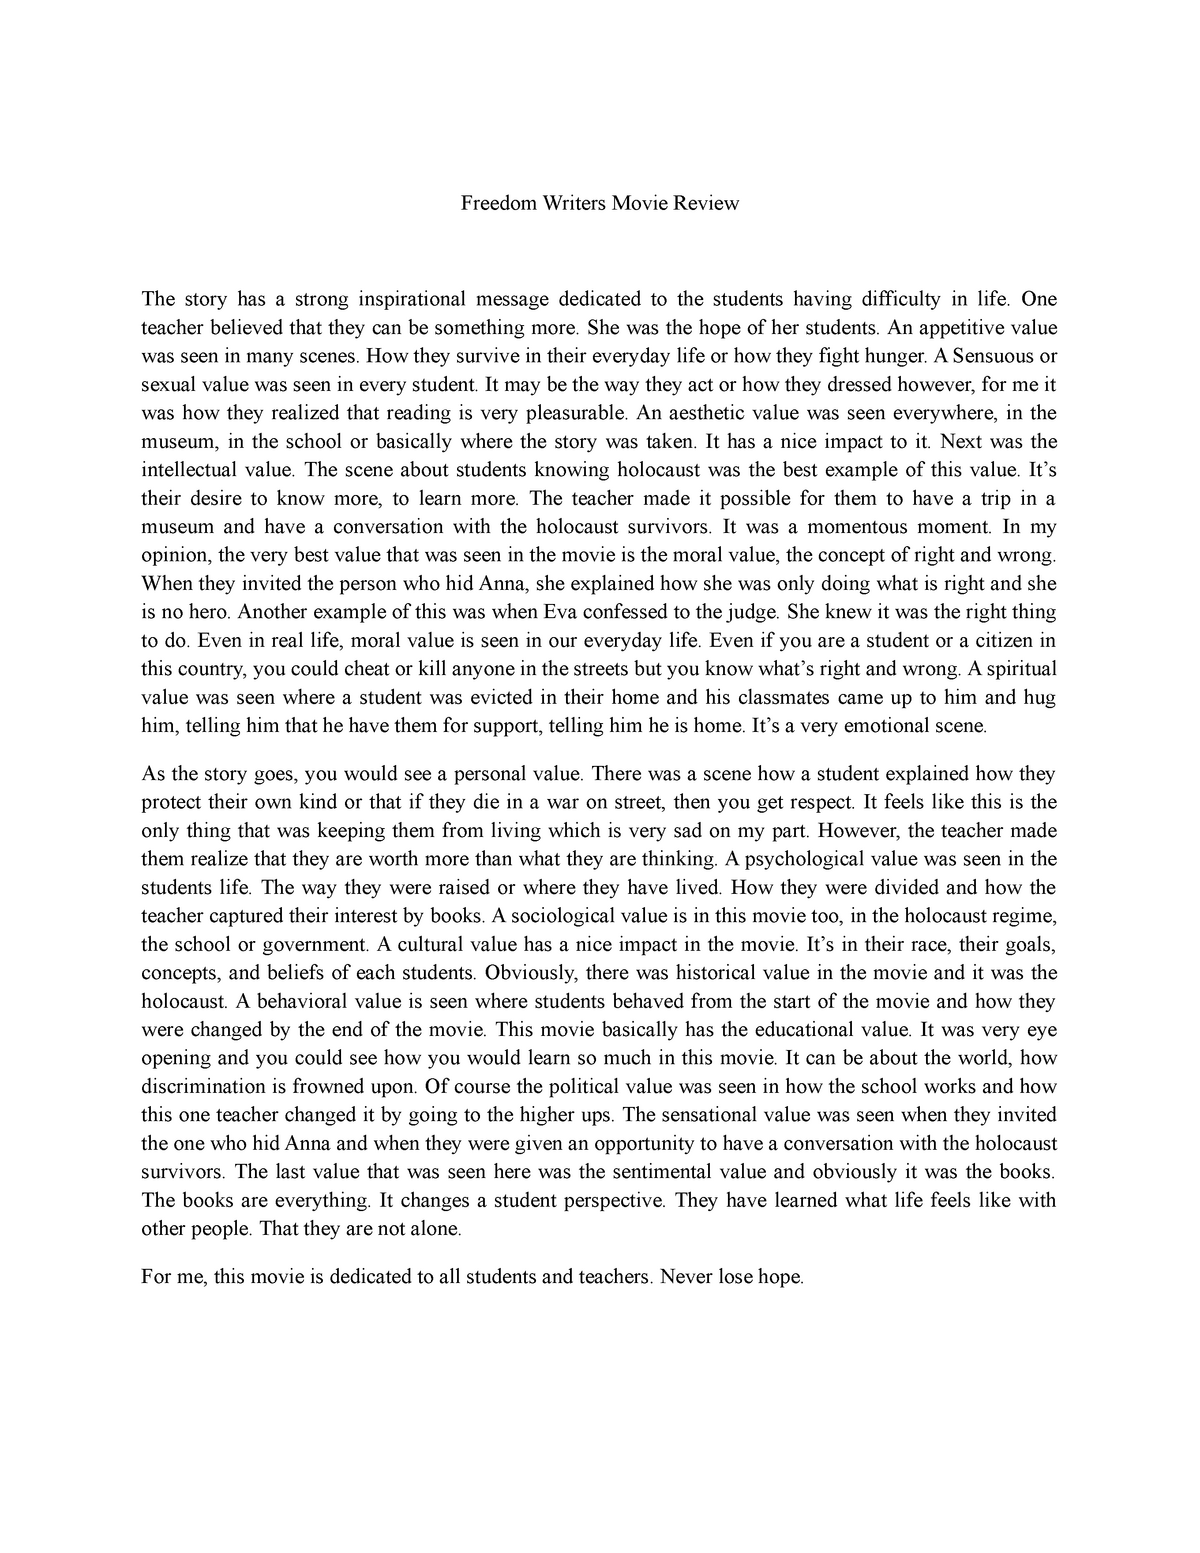 freedom writers essay introduction